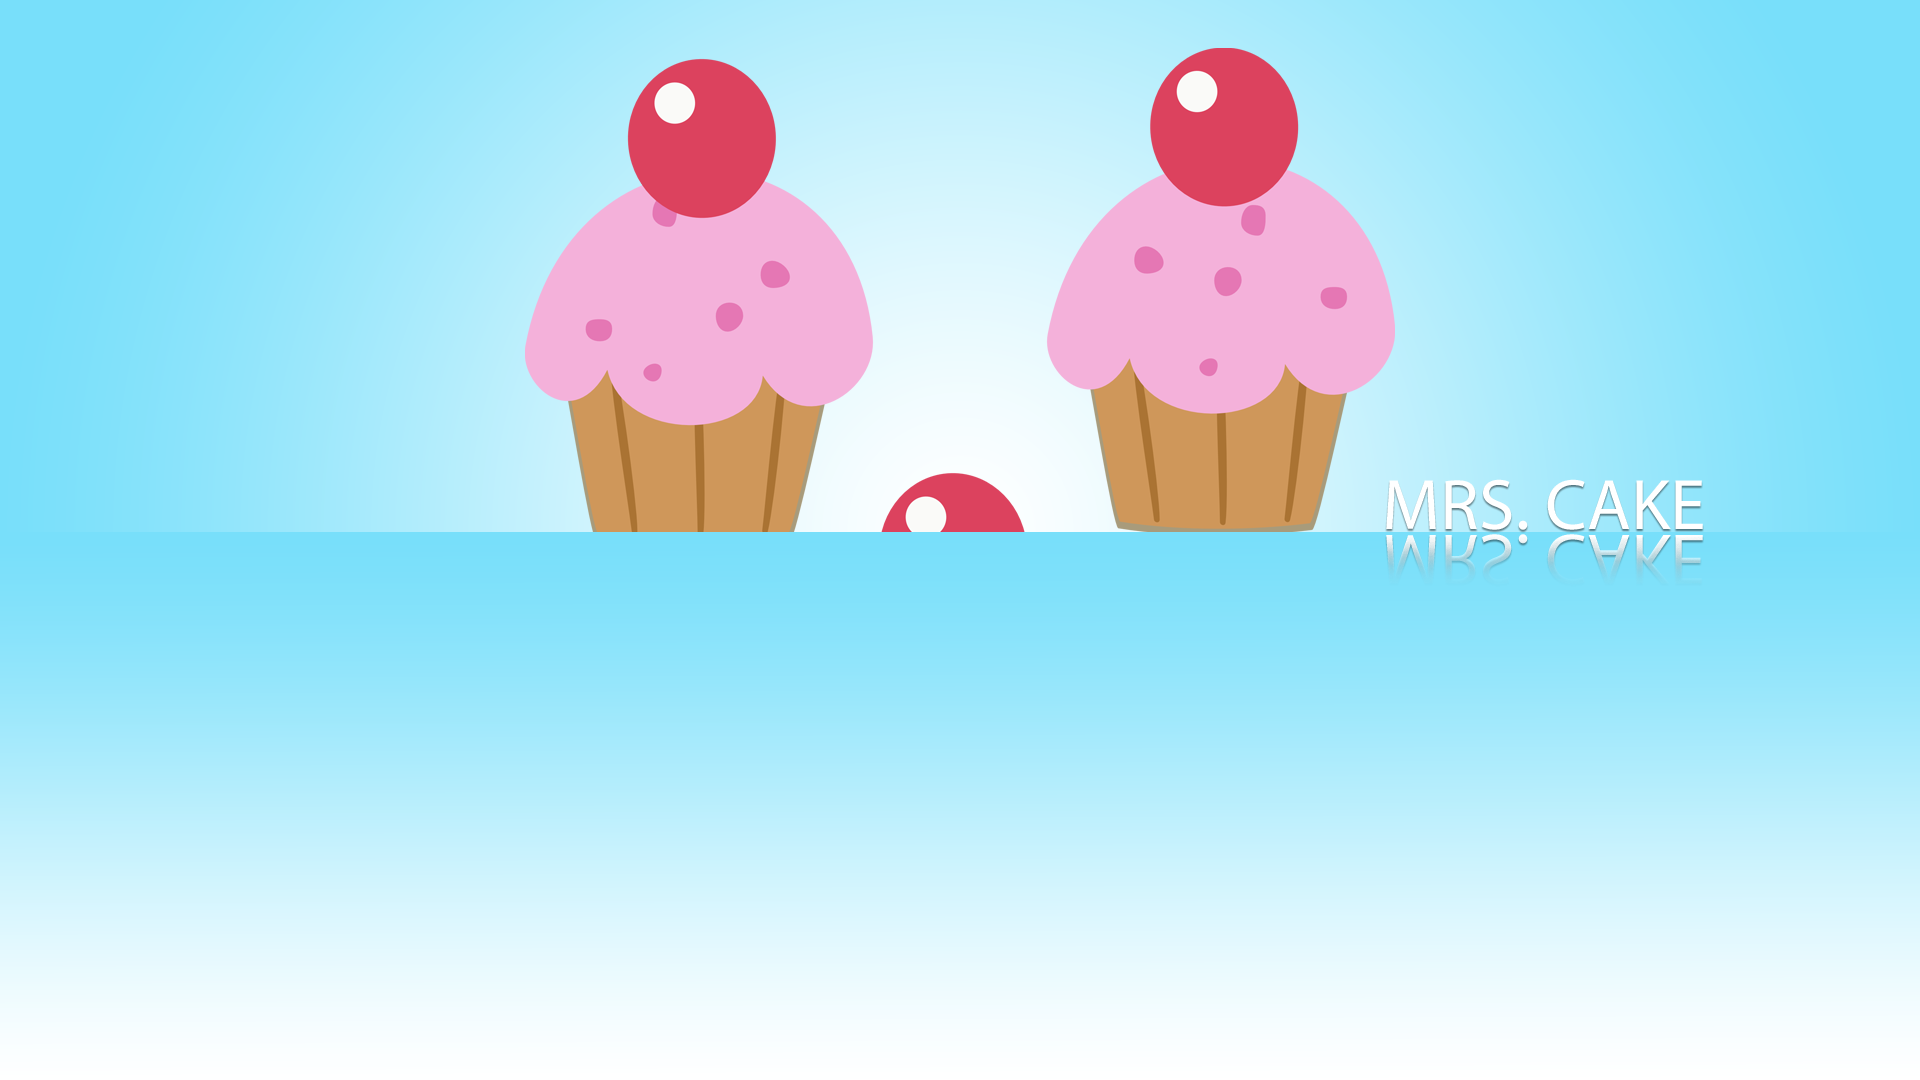 Mrs. Cake Minimalistic Wallpaper by BlueDragonHans and The-Smiling-Pony